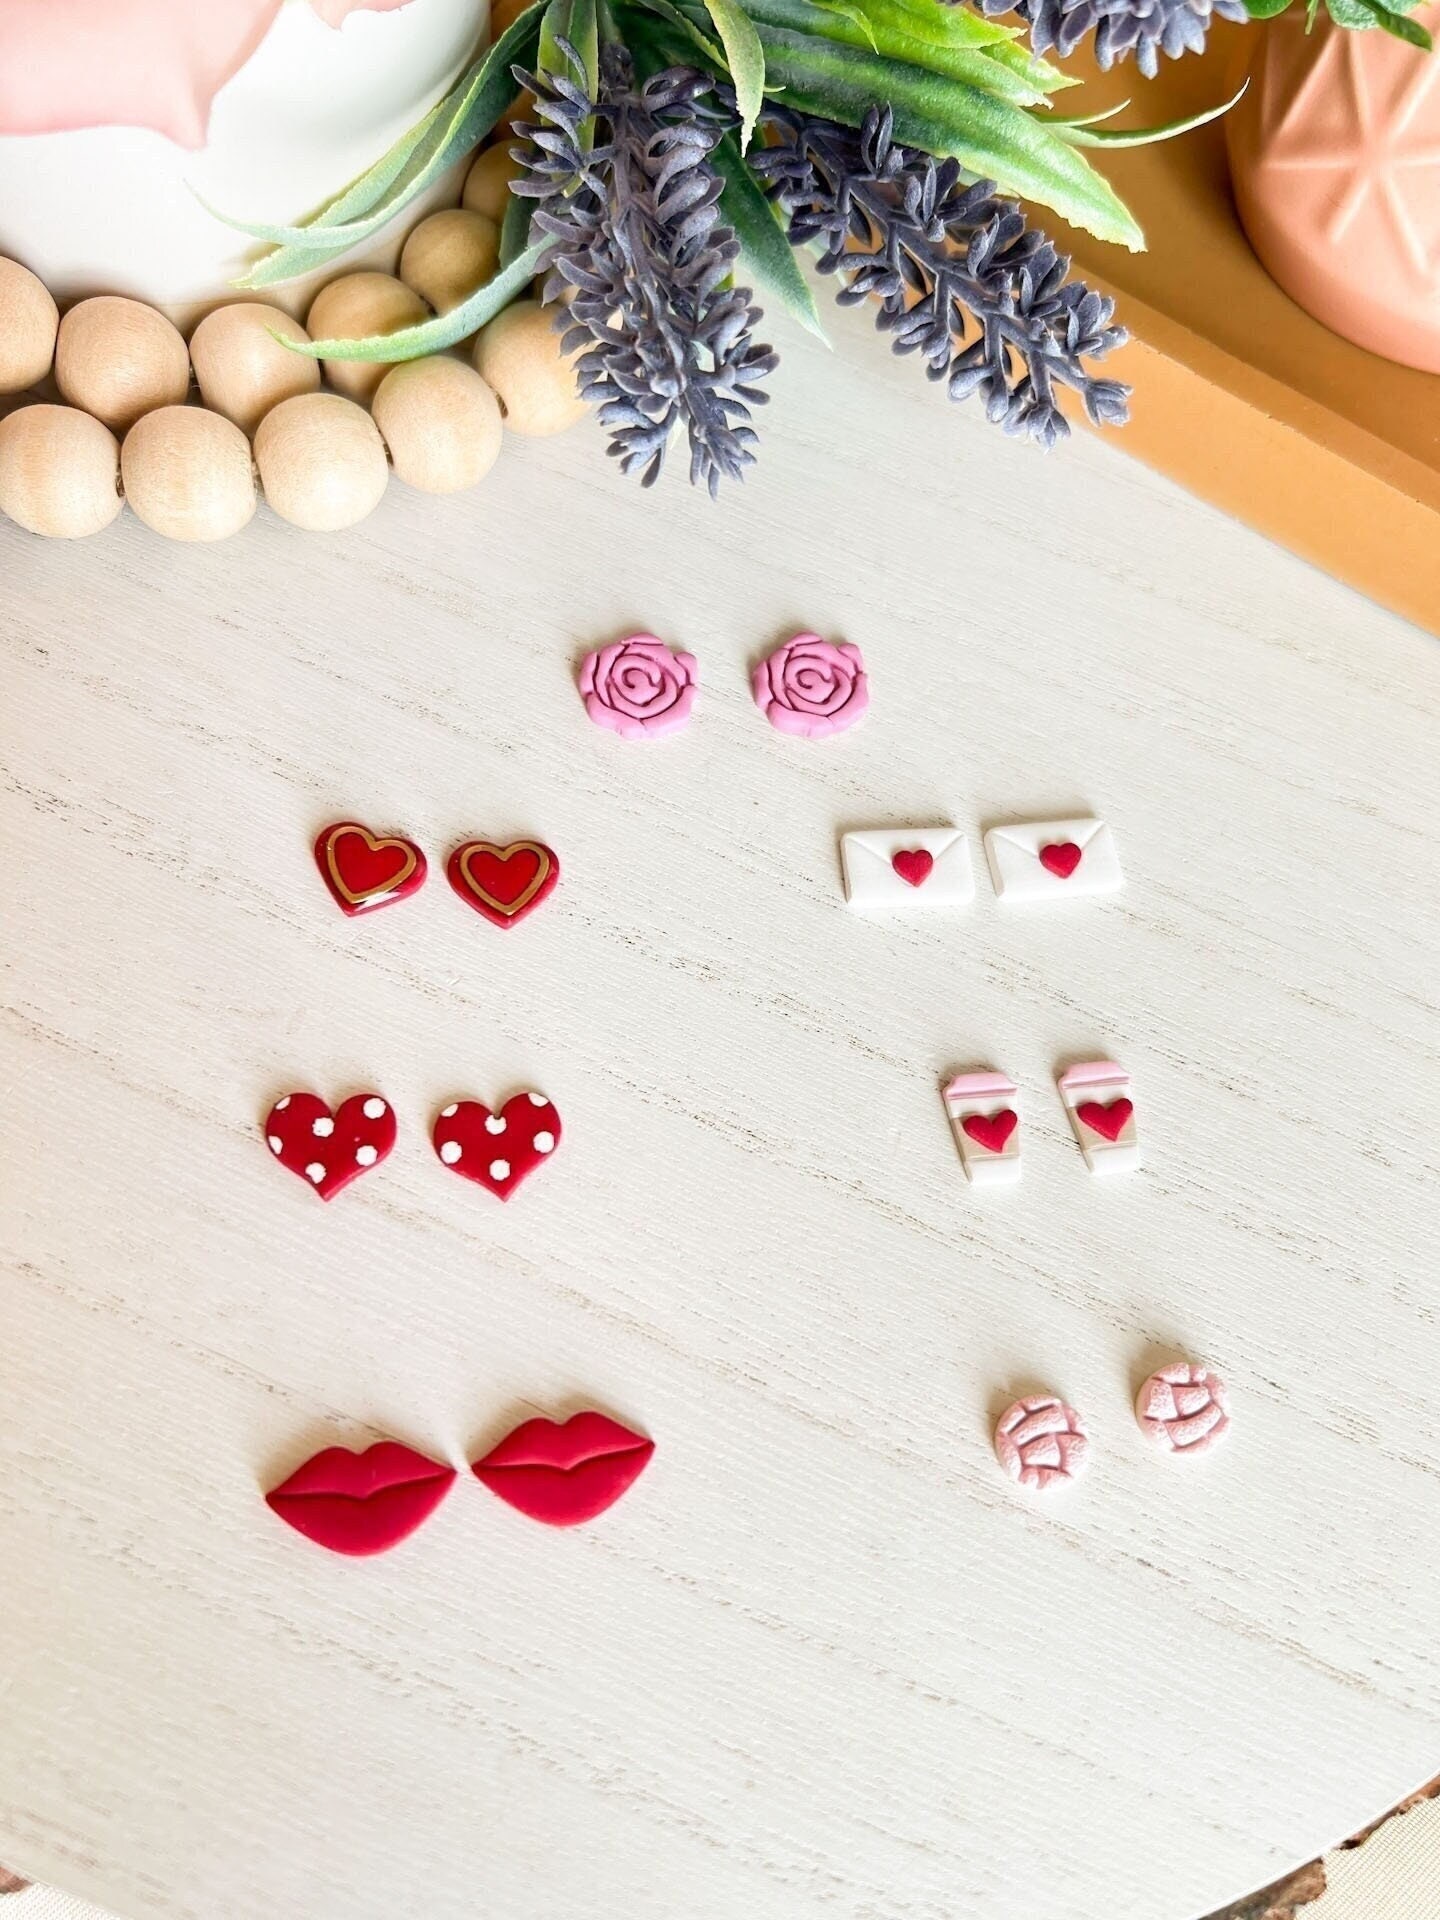 Mended heart, pink and black polymer clay stud earrings.